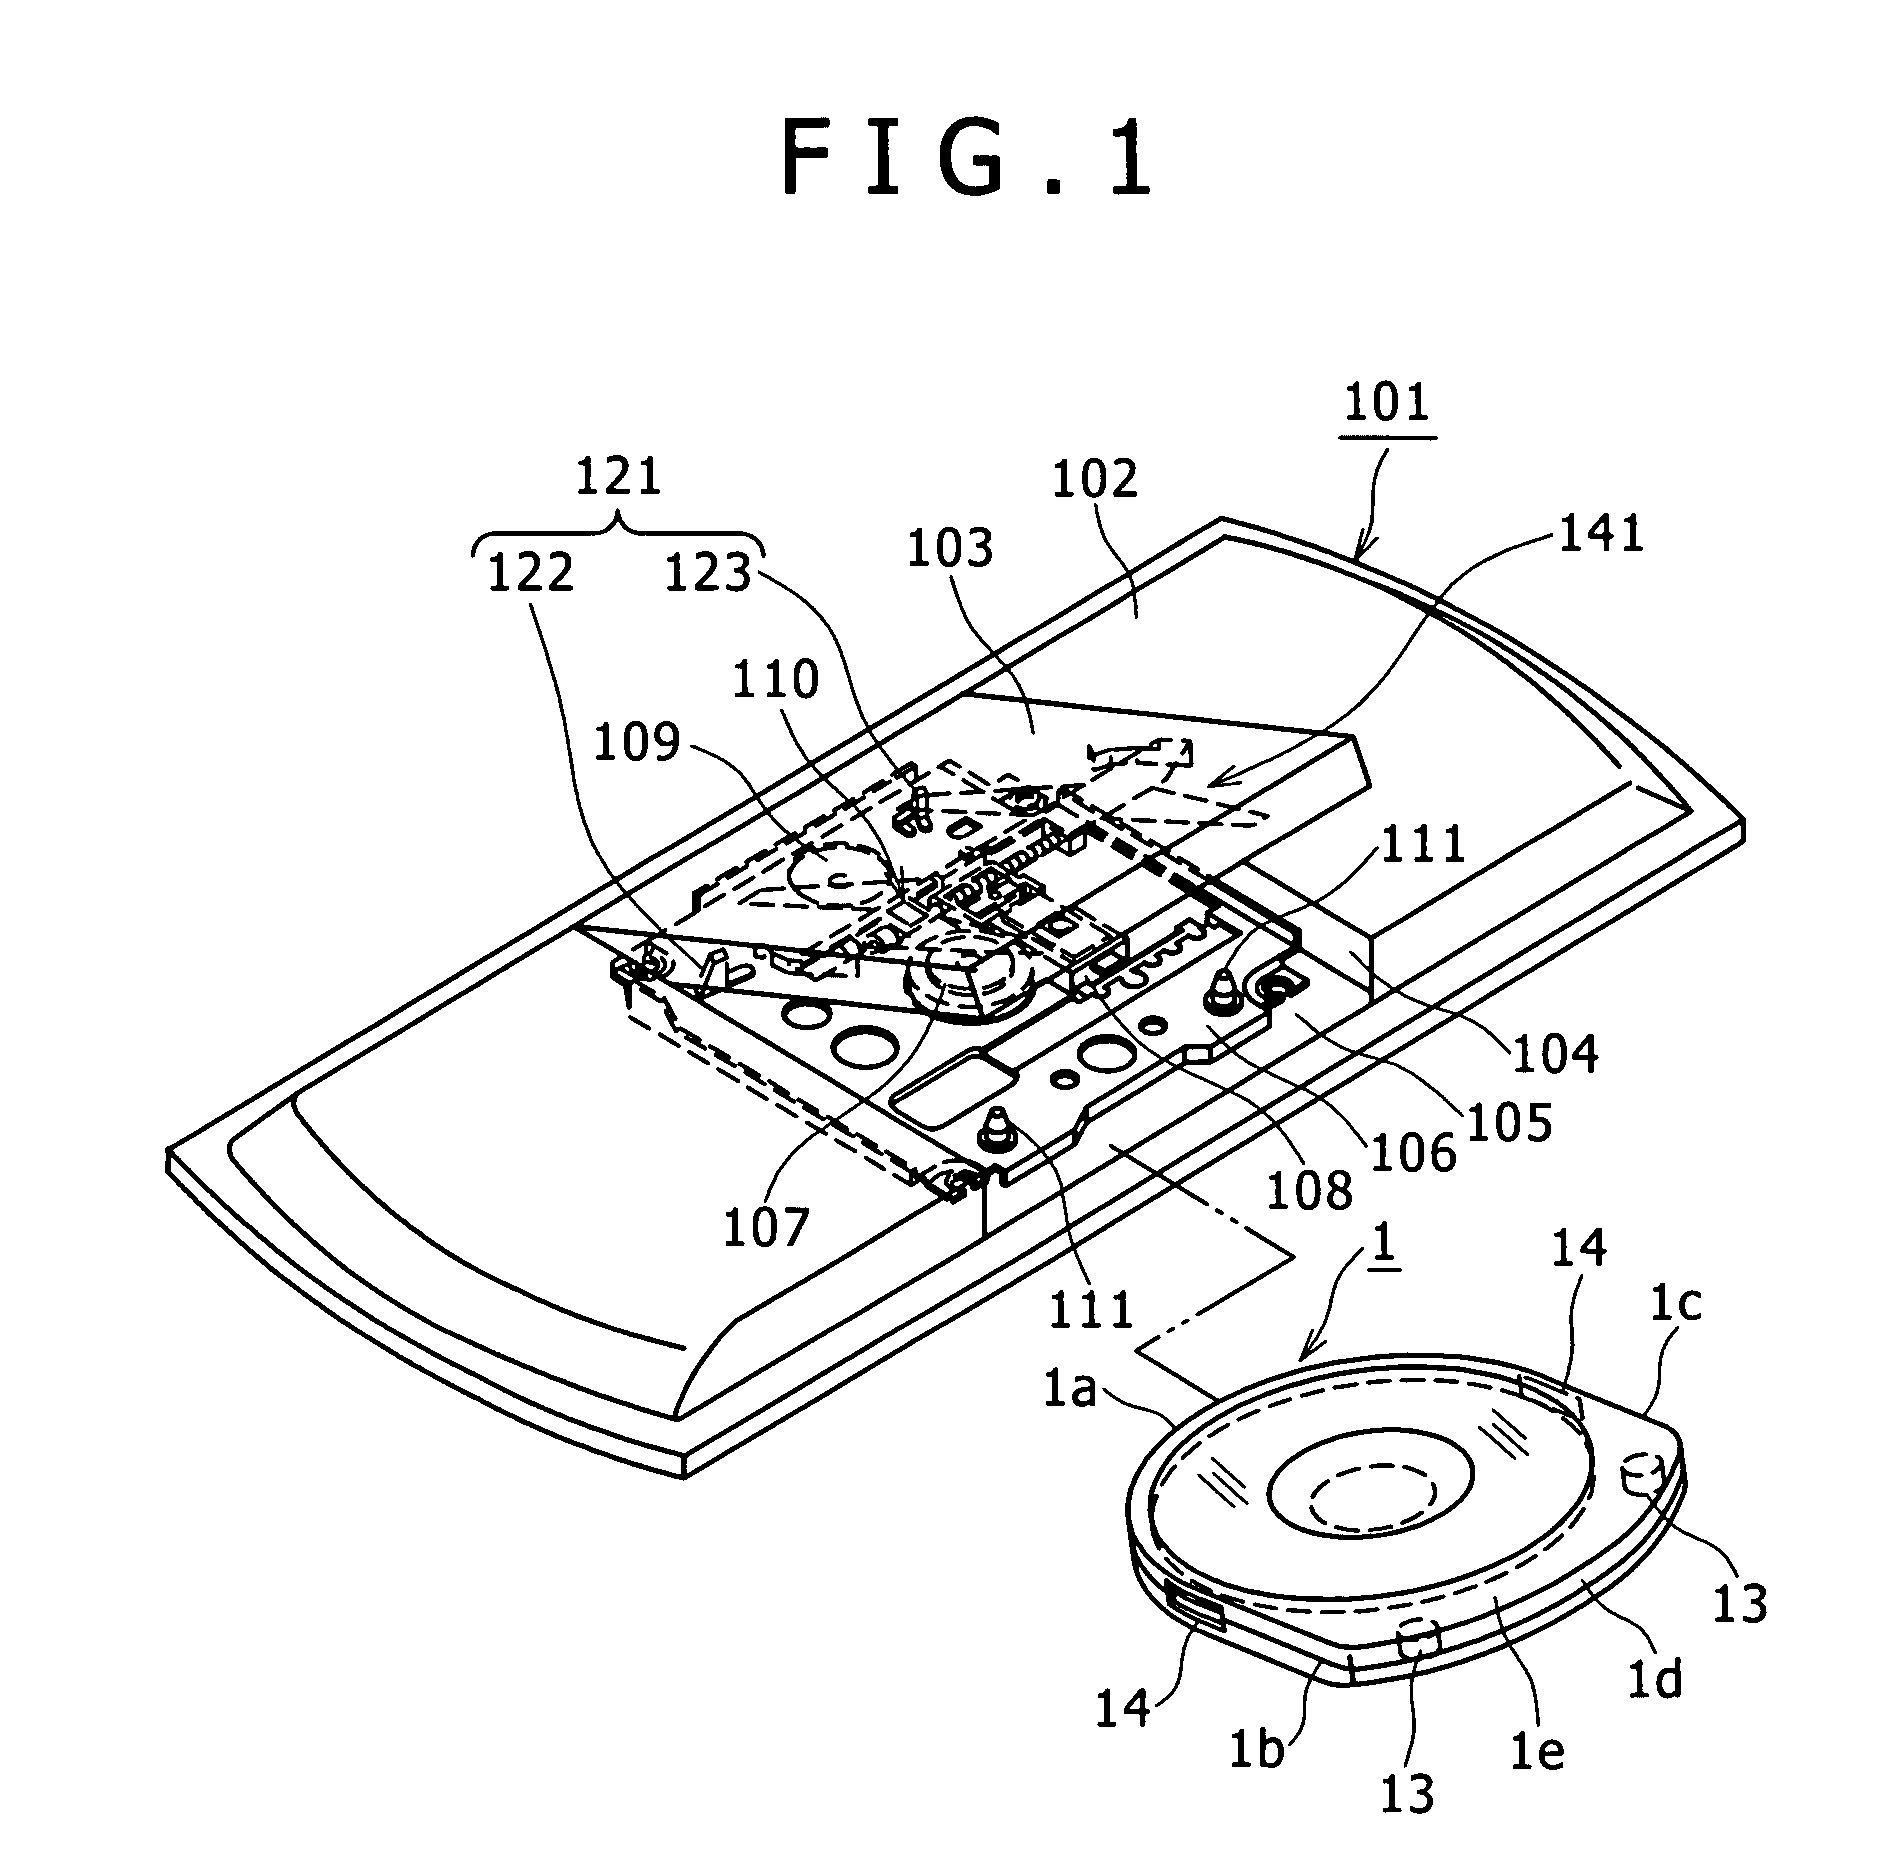 Reproducing device